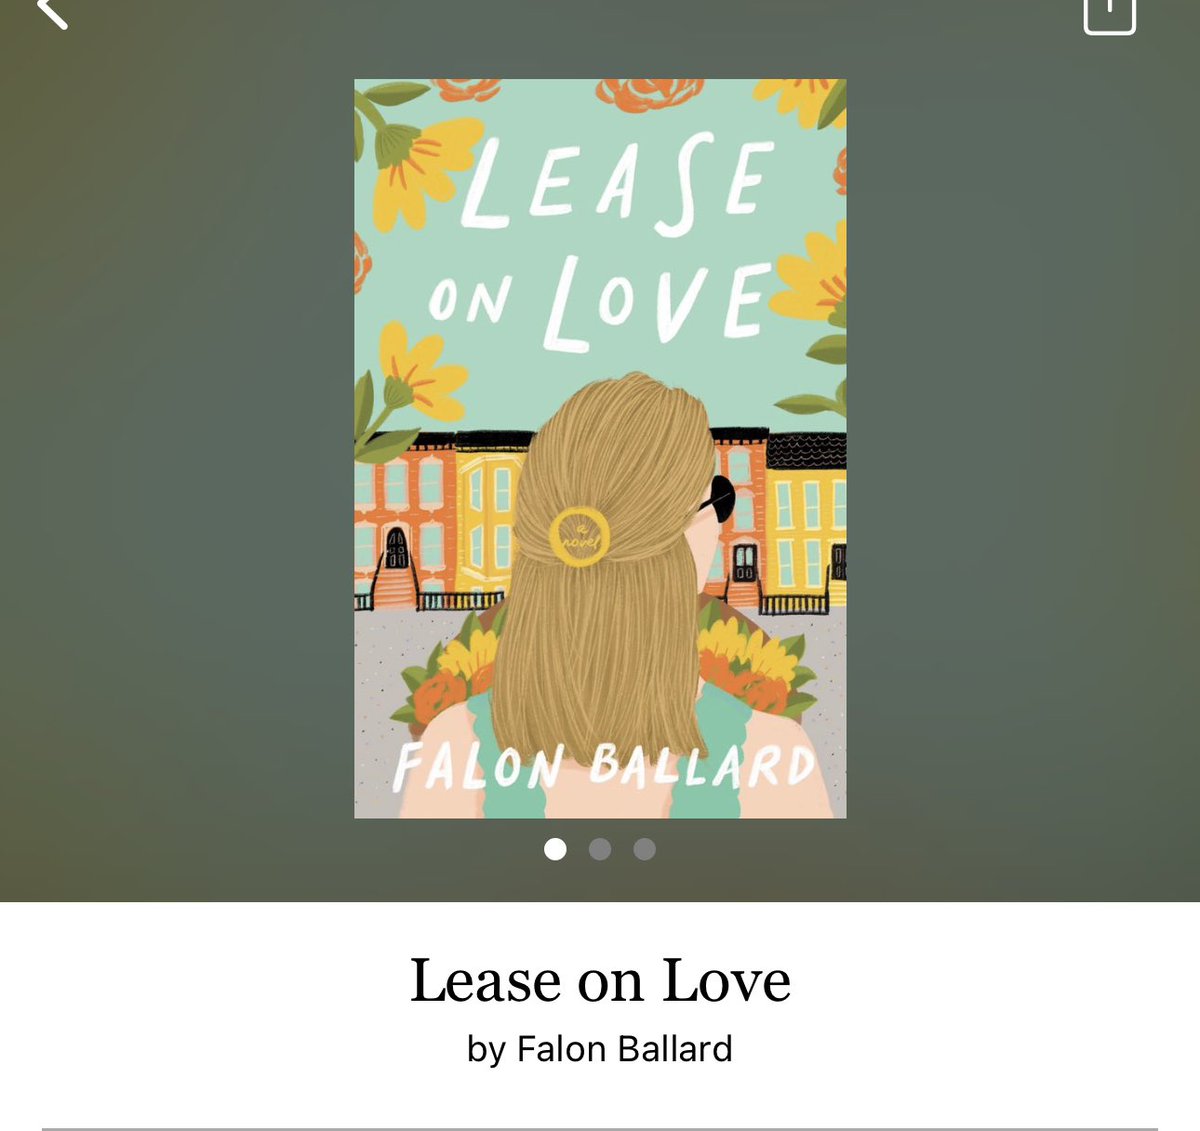 Lease On Love by Falon Ballard 

#LeaseOnLove by #FalonBallard #5318 #19chapters #332pages #august2023 #861of400 #9houraudiobook #audiobook #79for20 #SadieAndJack #clearingoffreadingshelves #whatsnext #readitquick